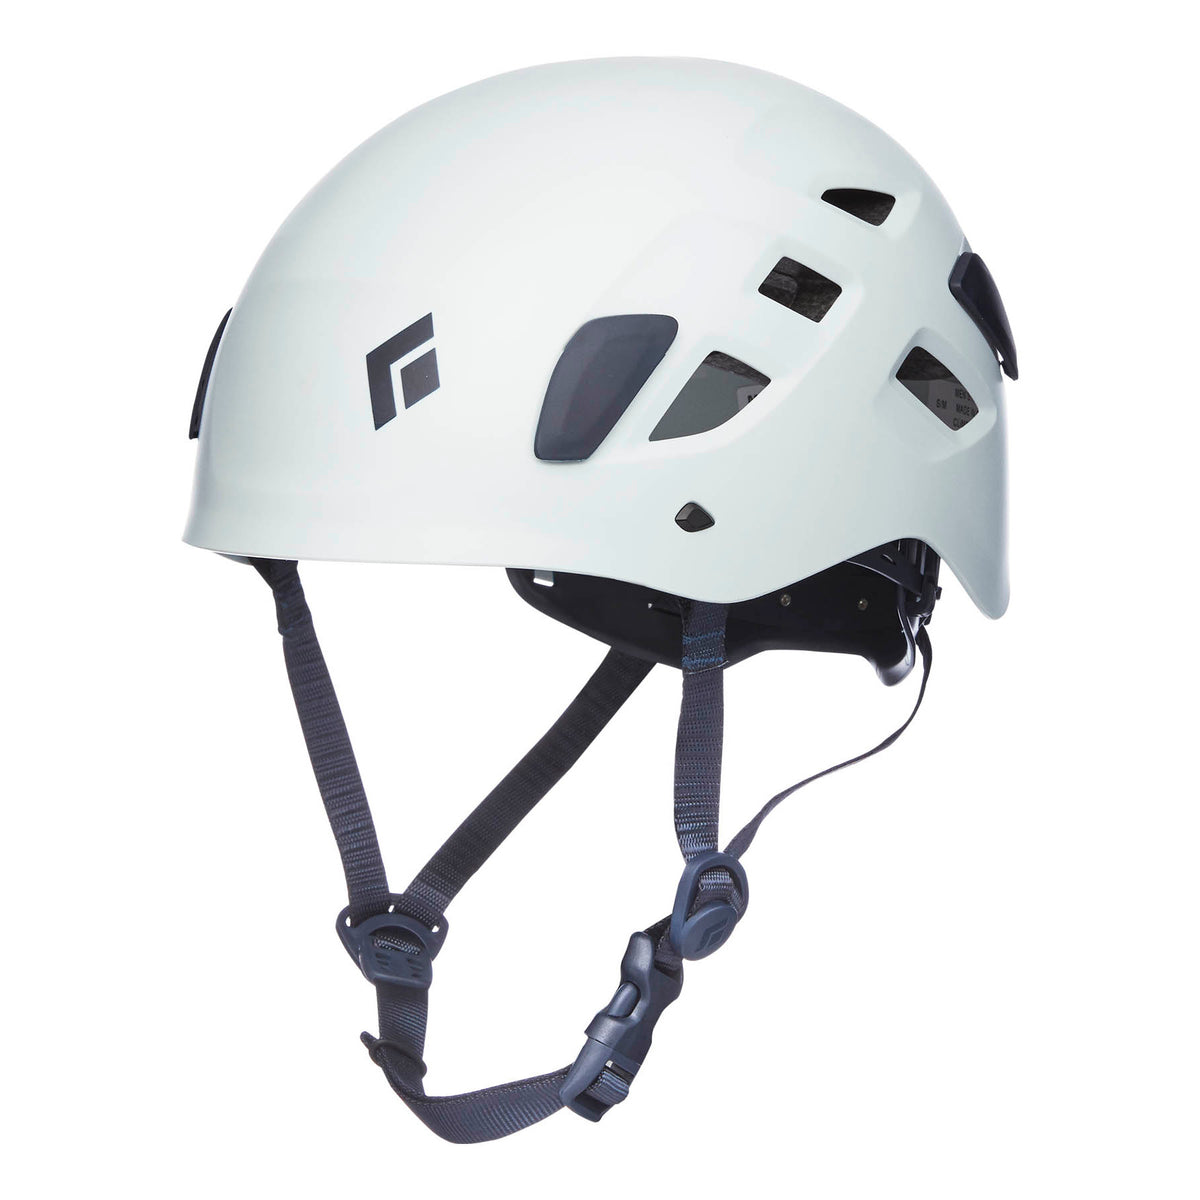 Black Diamond Half Dome climbing helmet, front/side view in white colour with grey chin strap